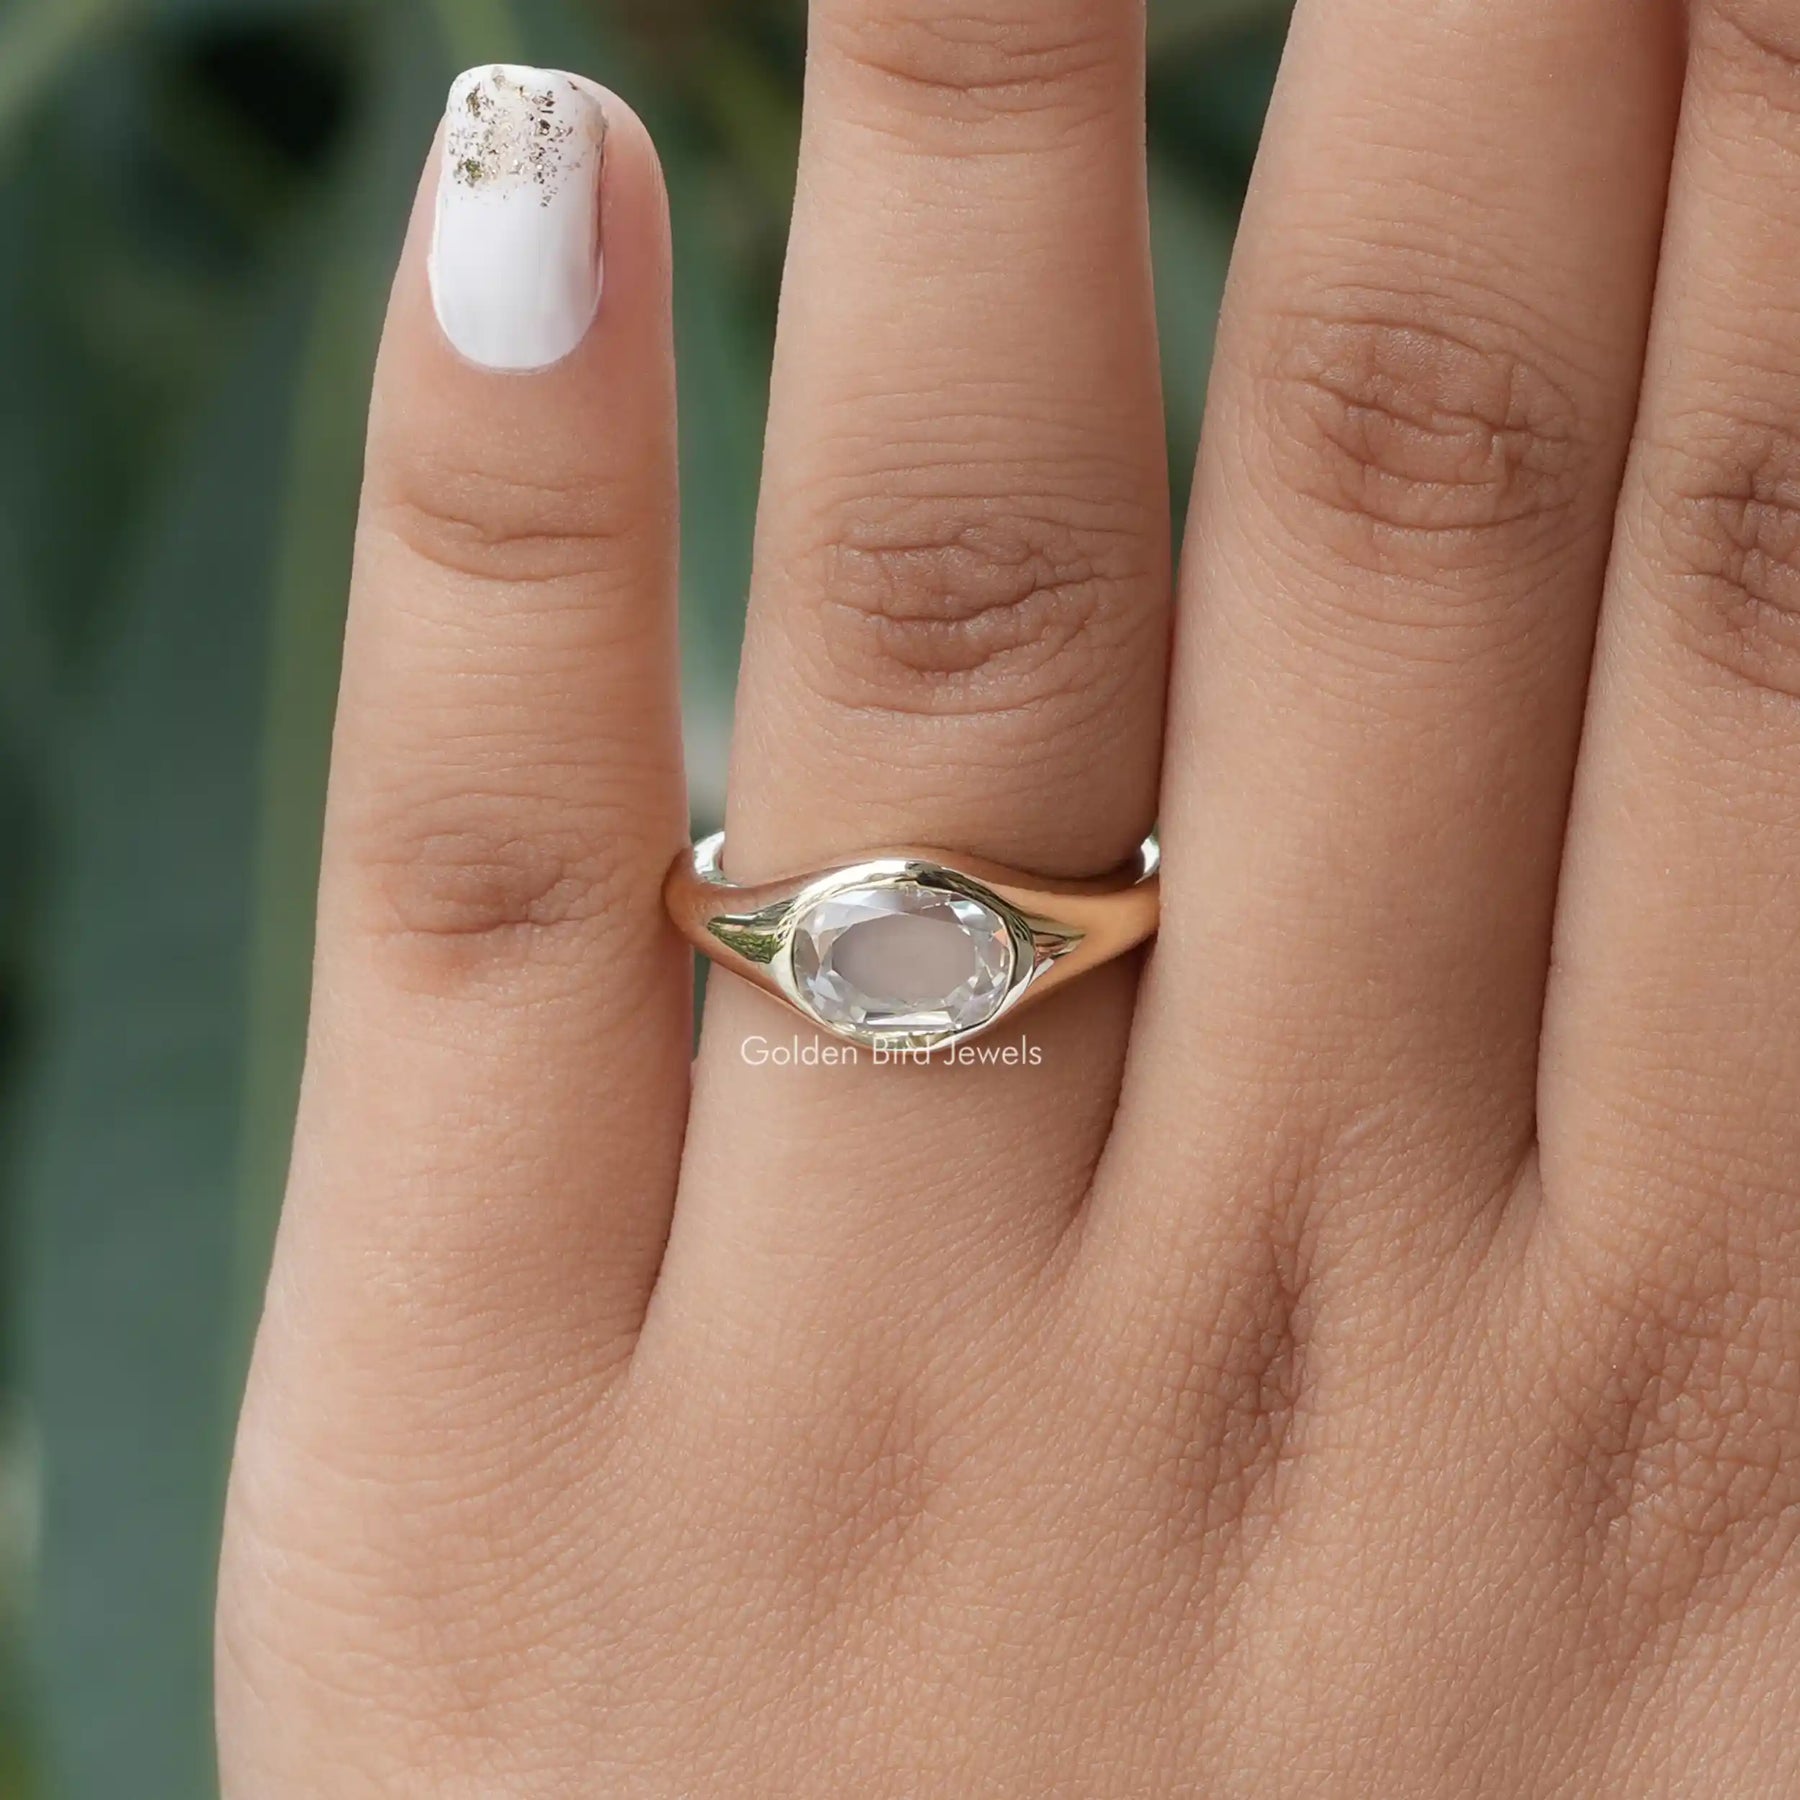 [In finger front view of oval cut moissanite ring made of bezel setting]-[Golden Bird Jewels]